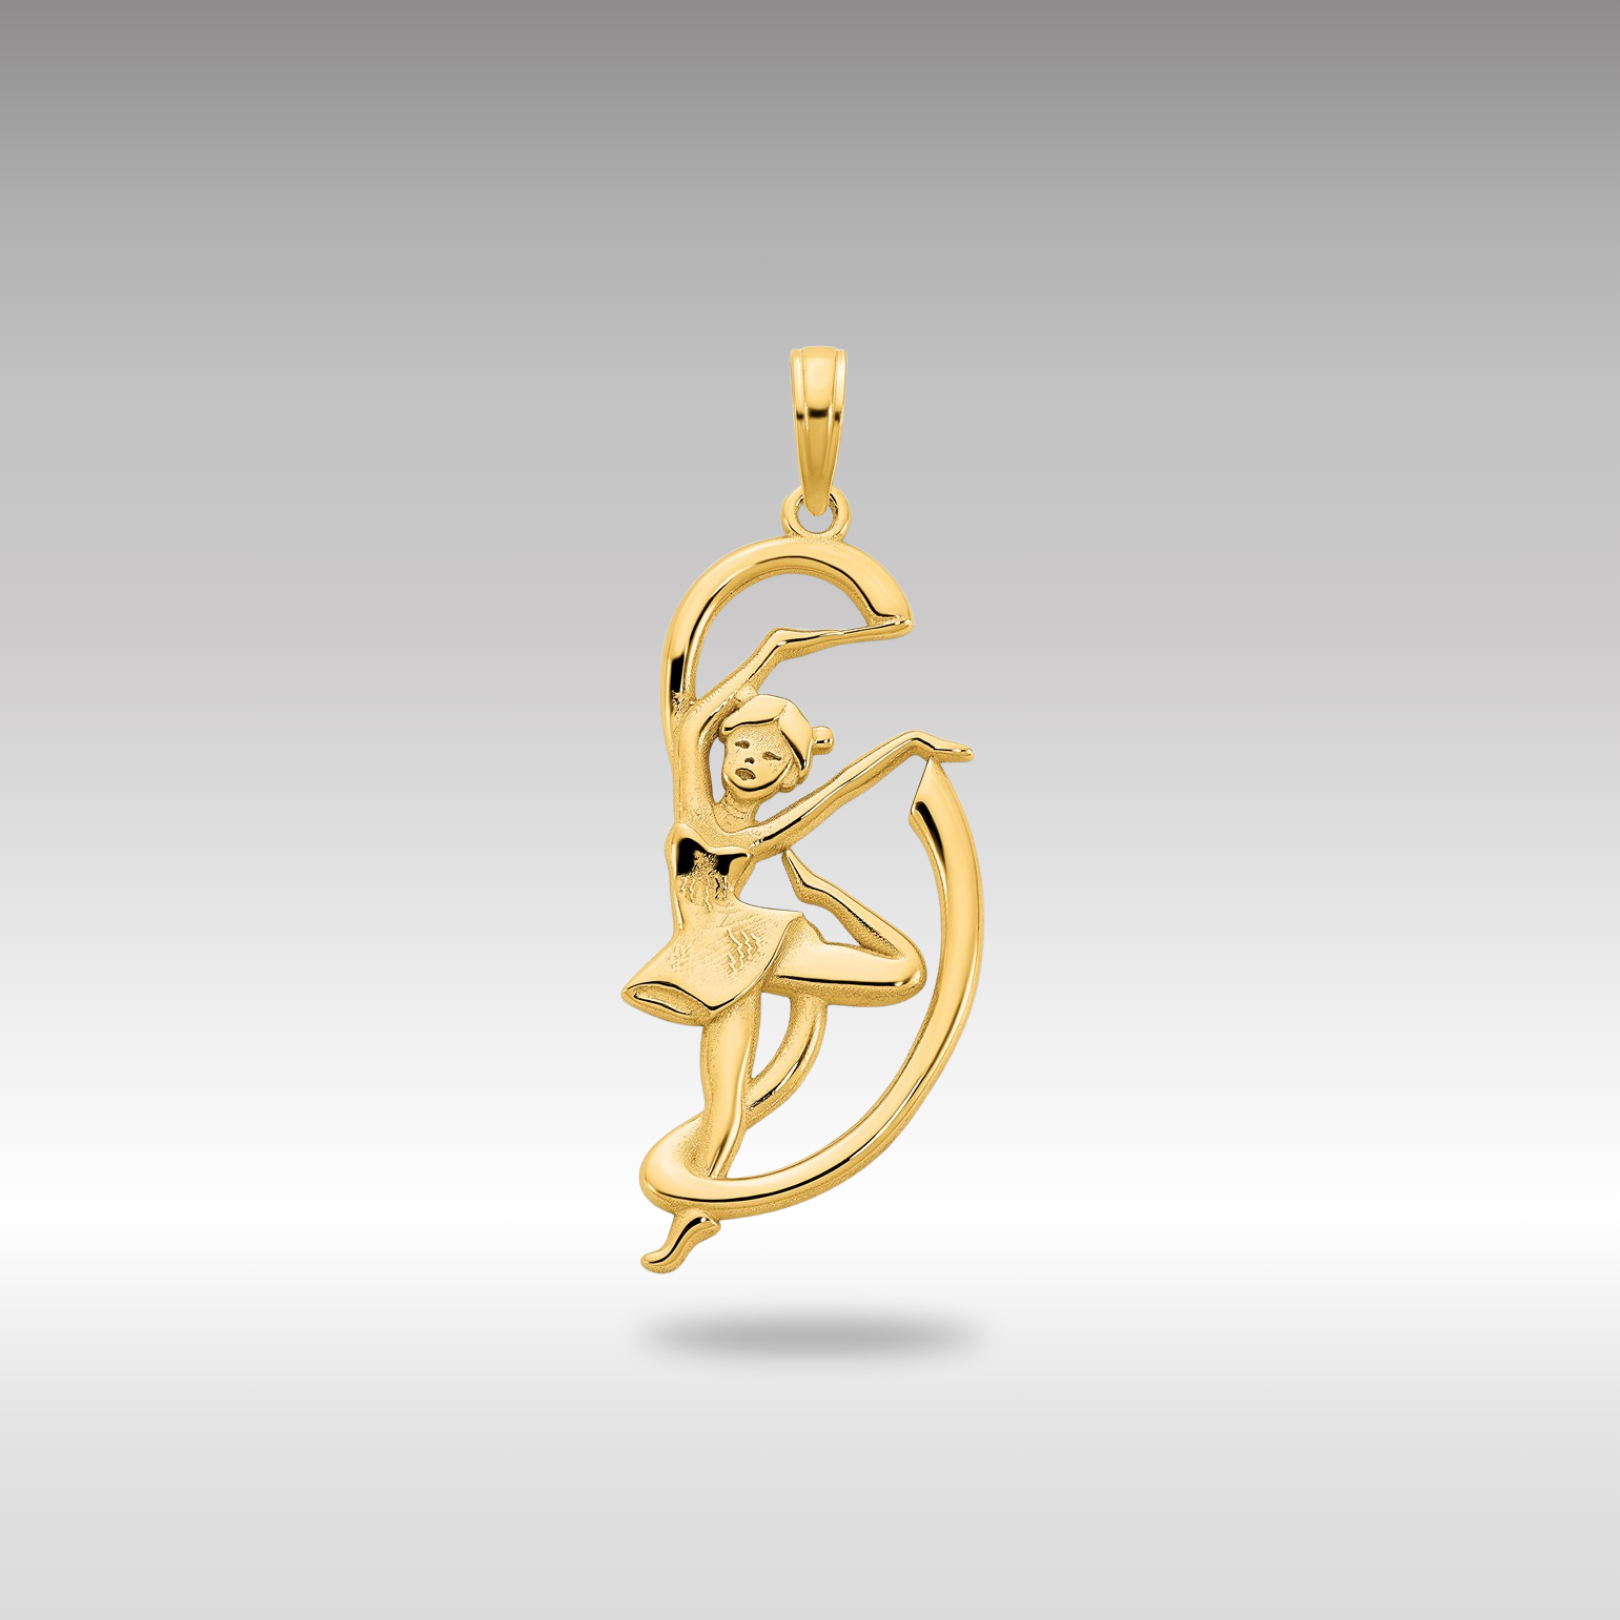 Gold Gymnast with Ribbon Necklace Pendant - Charlie & Co. Jewelry